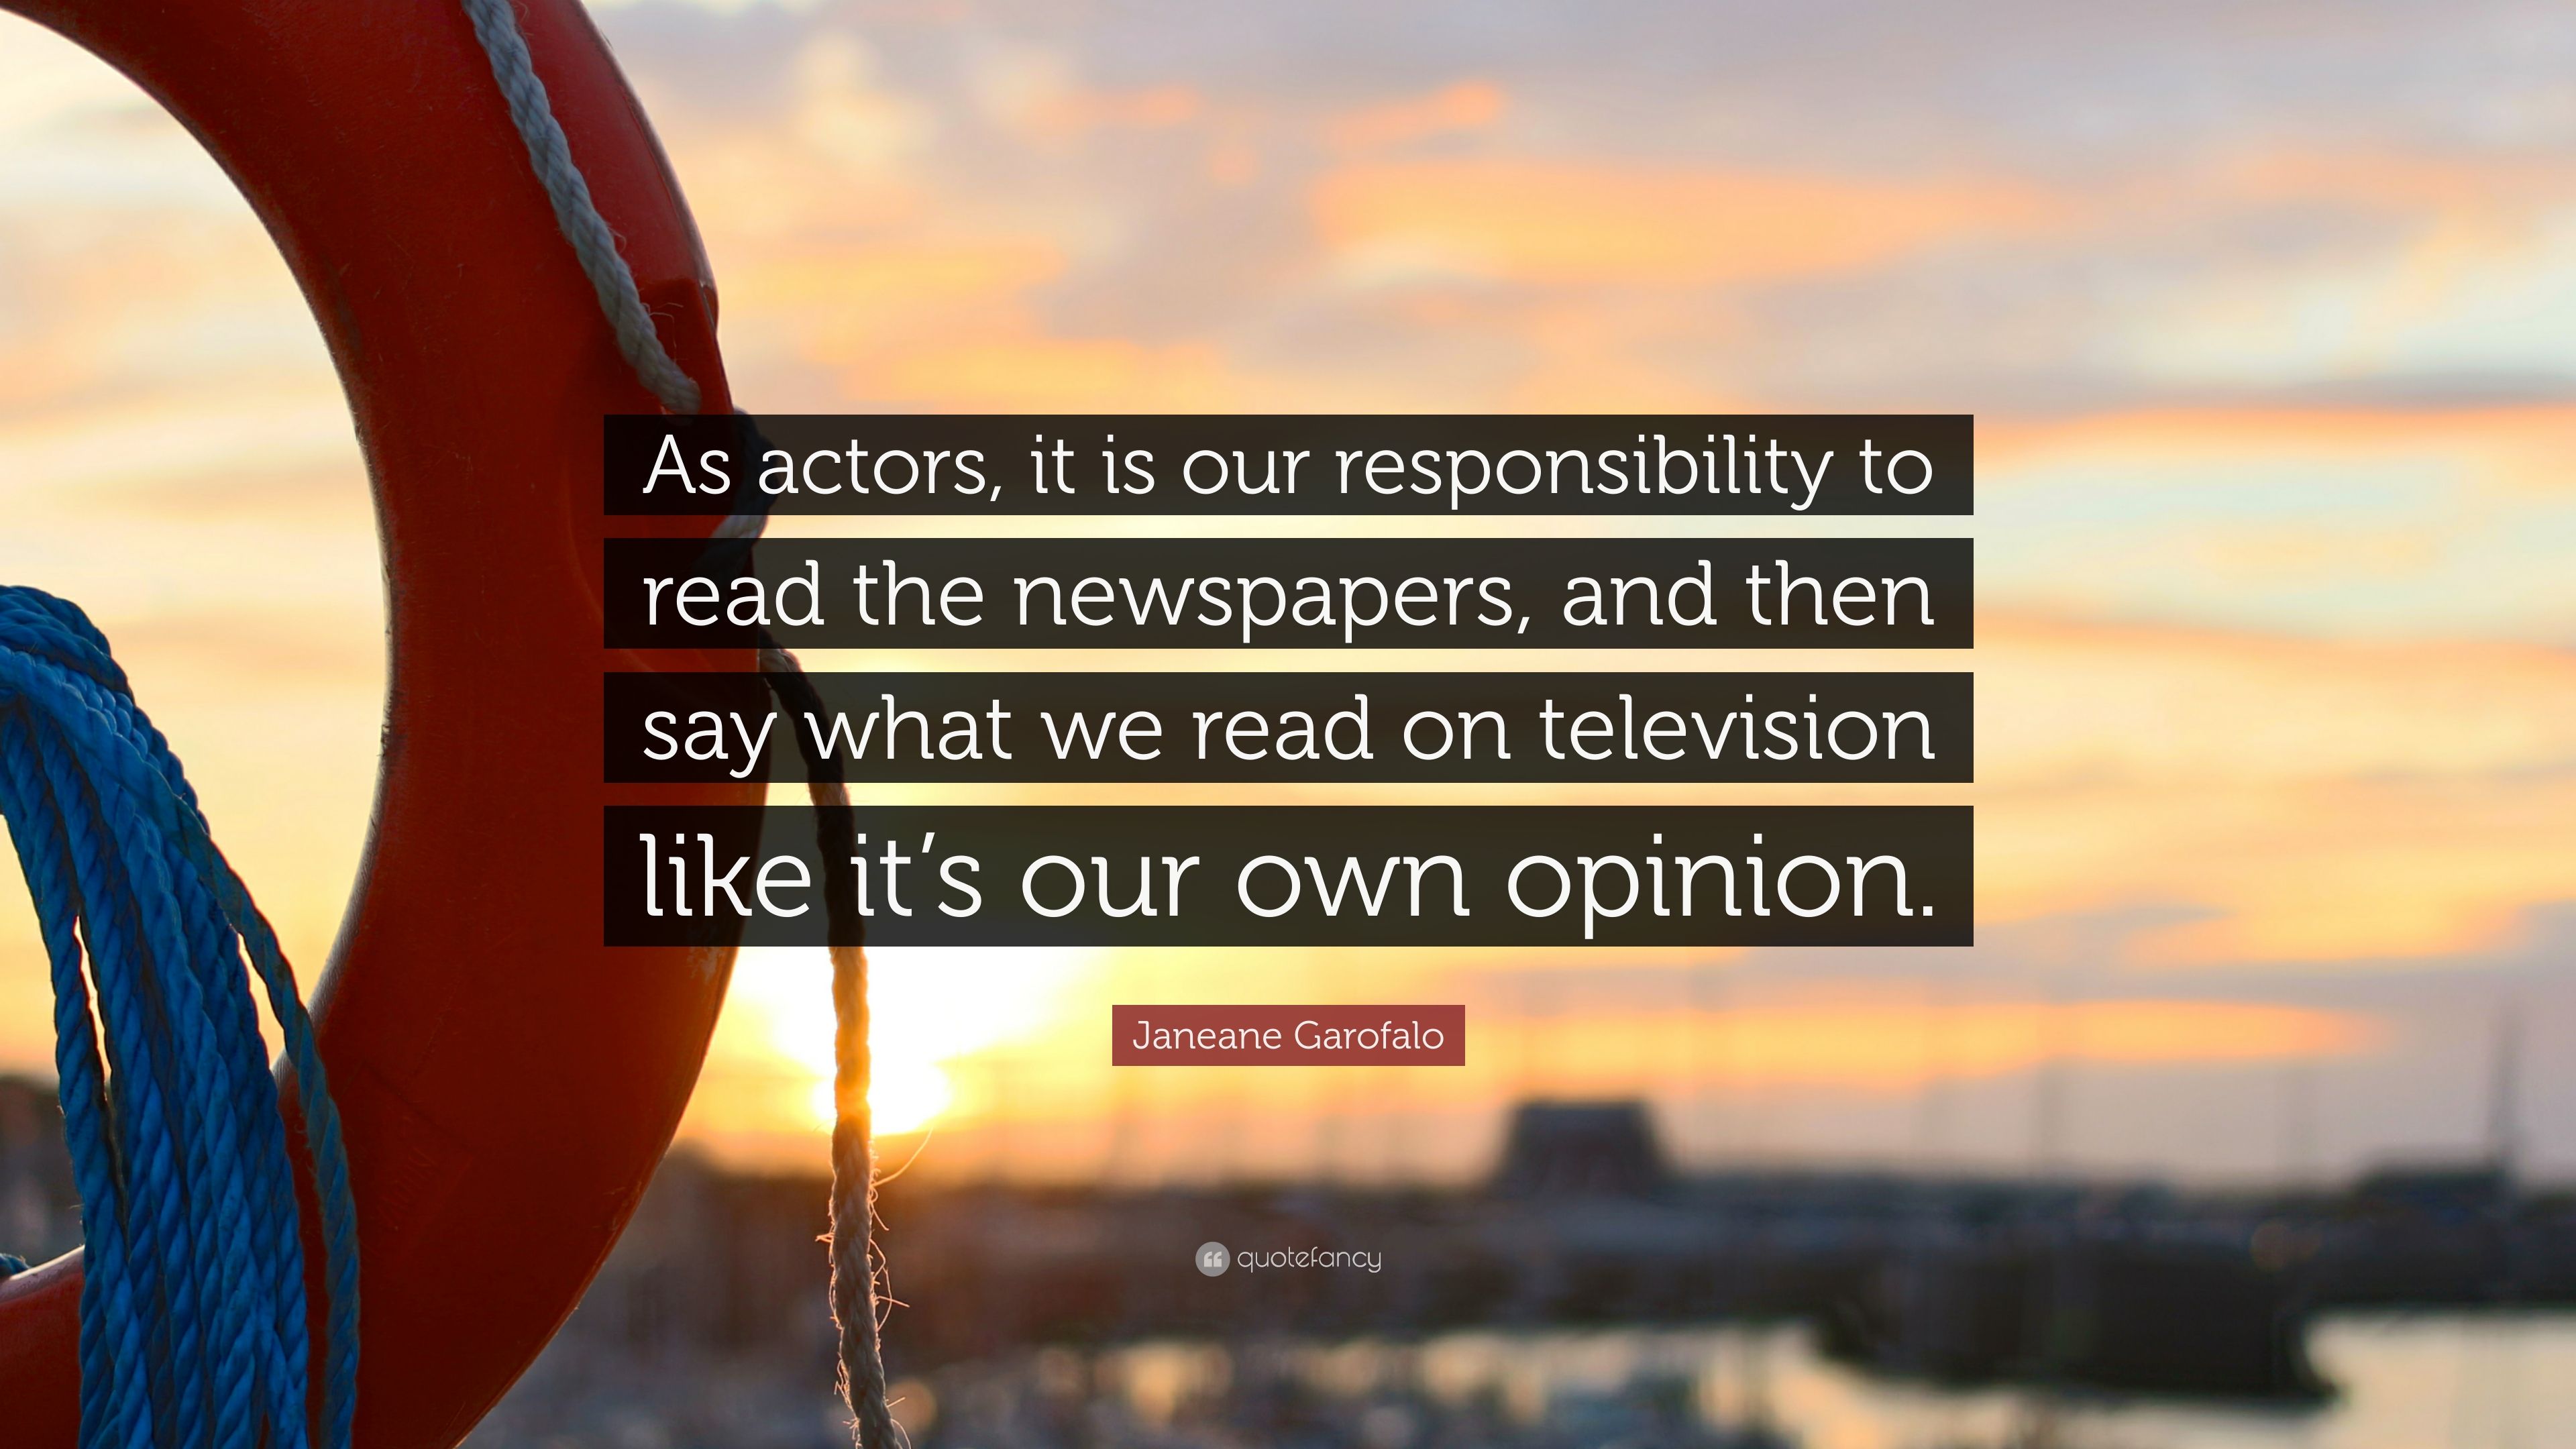 Janeane Garofalo Quote: “As actors, it is our responsibility to read ...